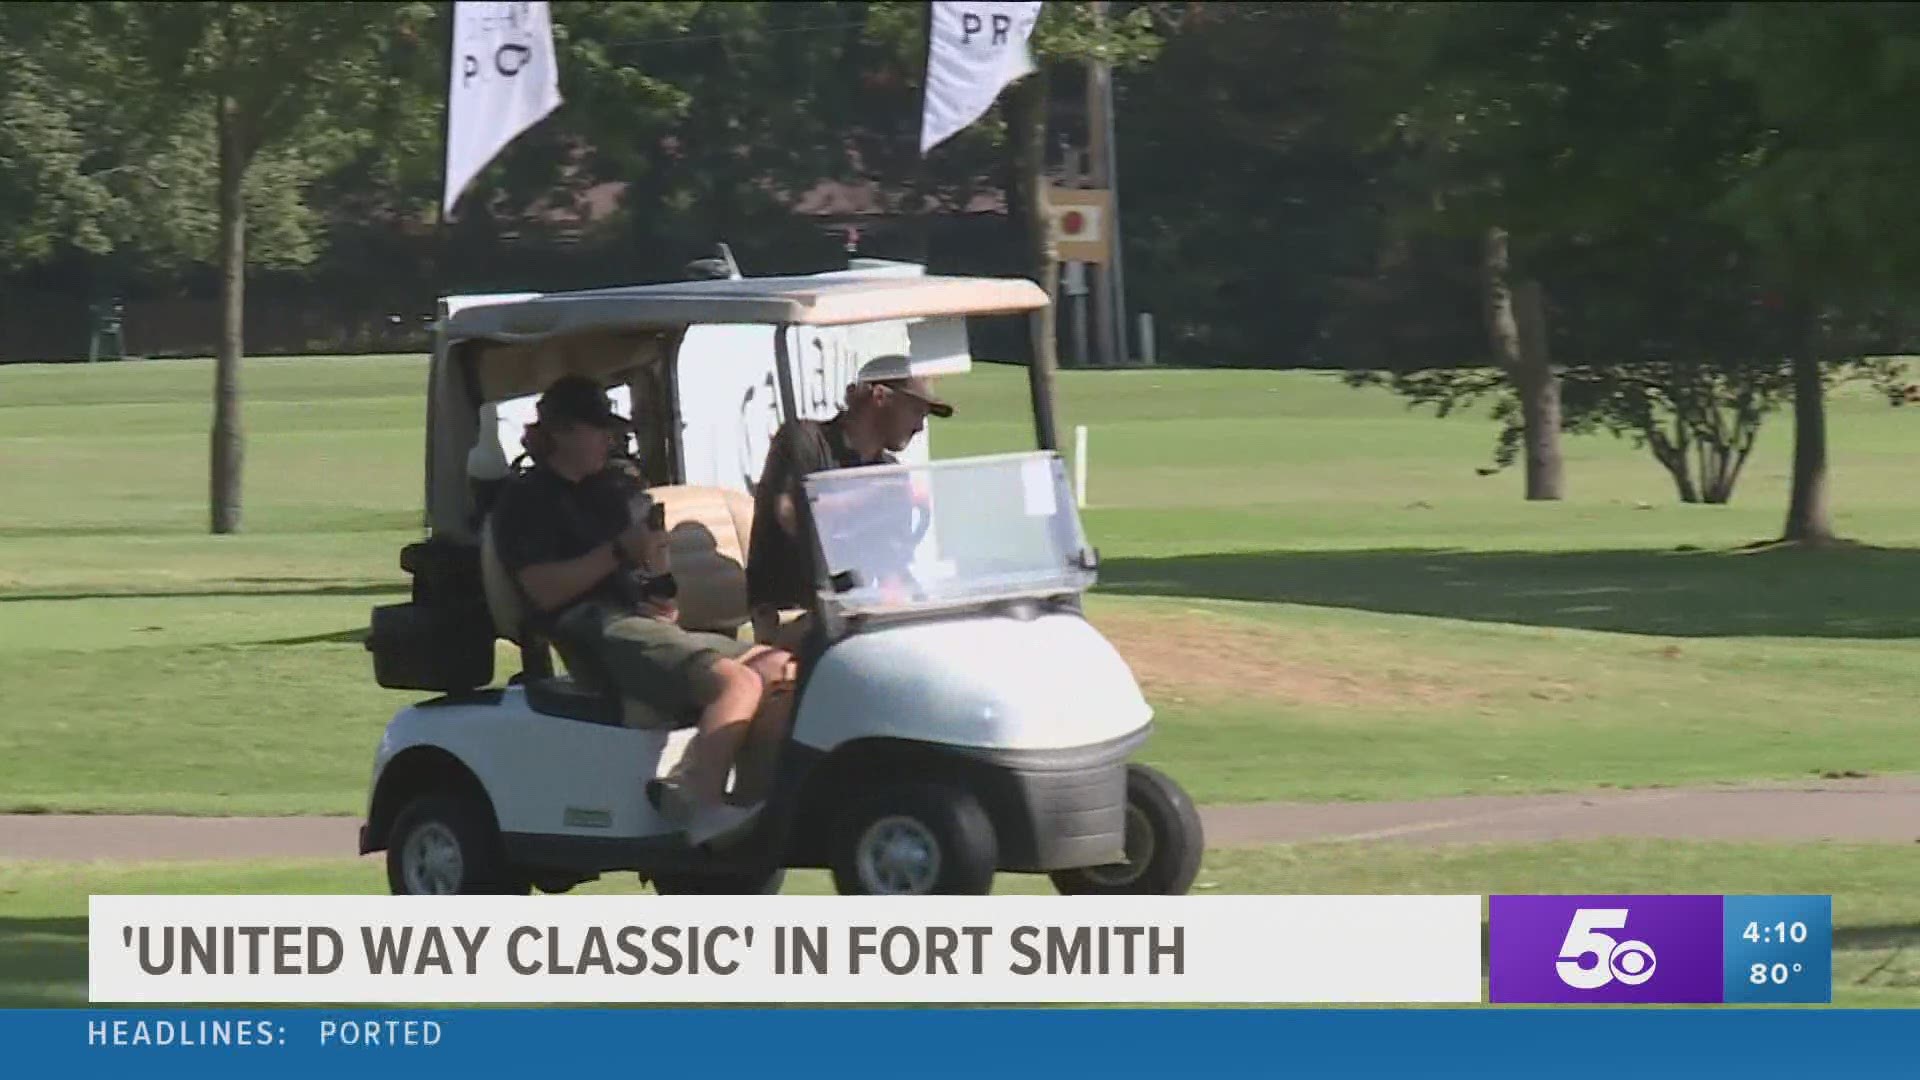 United Way Classic underway in Fort Smith